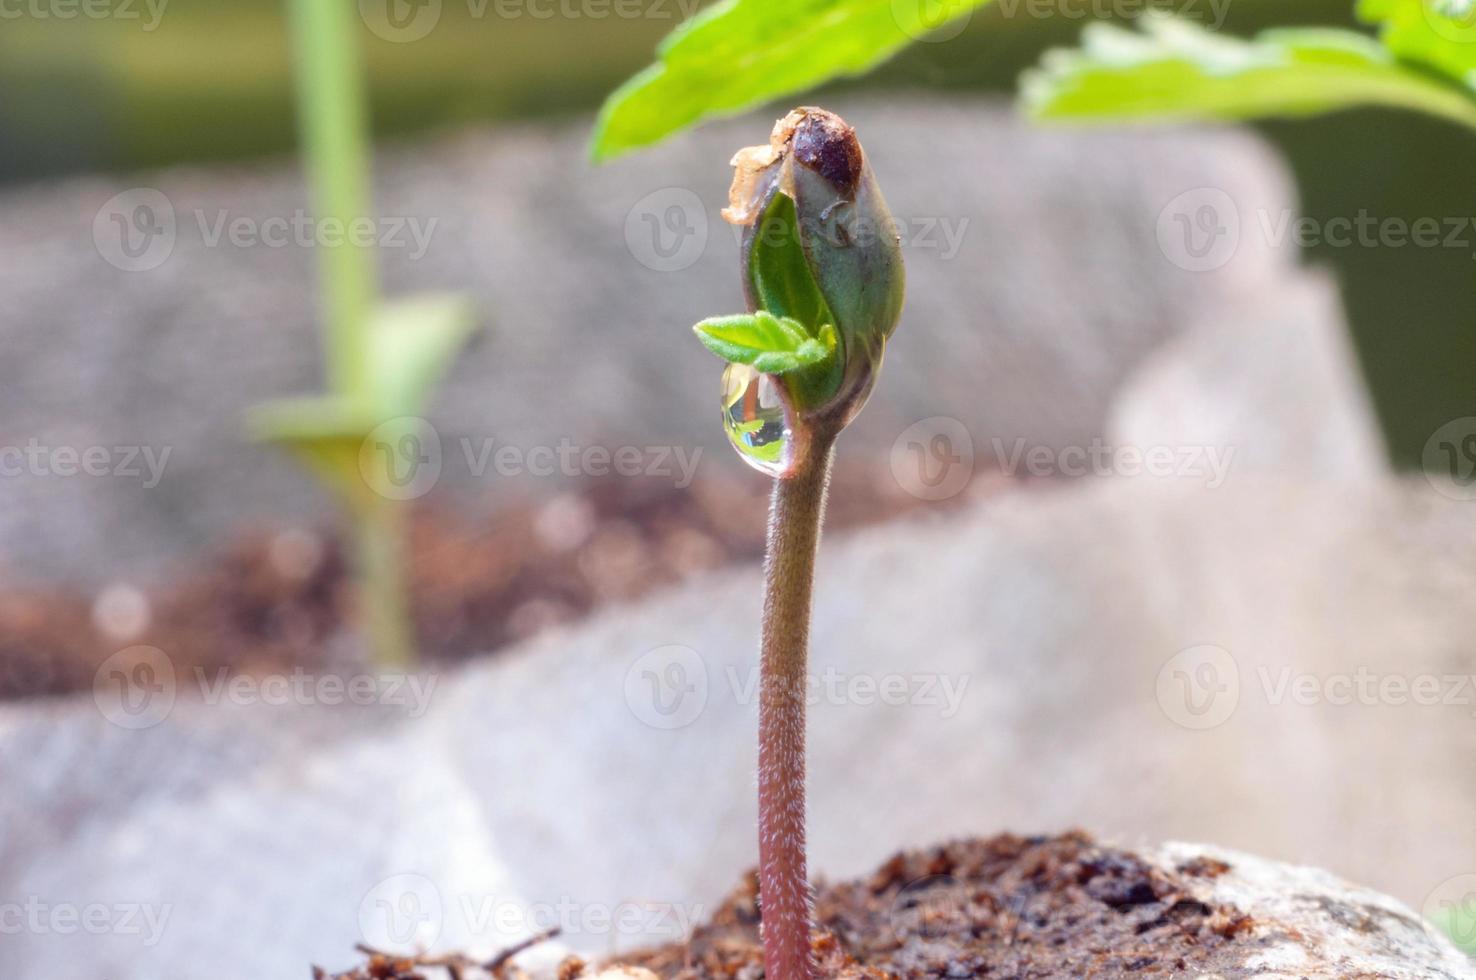 baby cannabis seedling sprout in jiffy peat pellet with drop of water clear on top close up photo